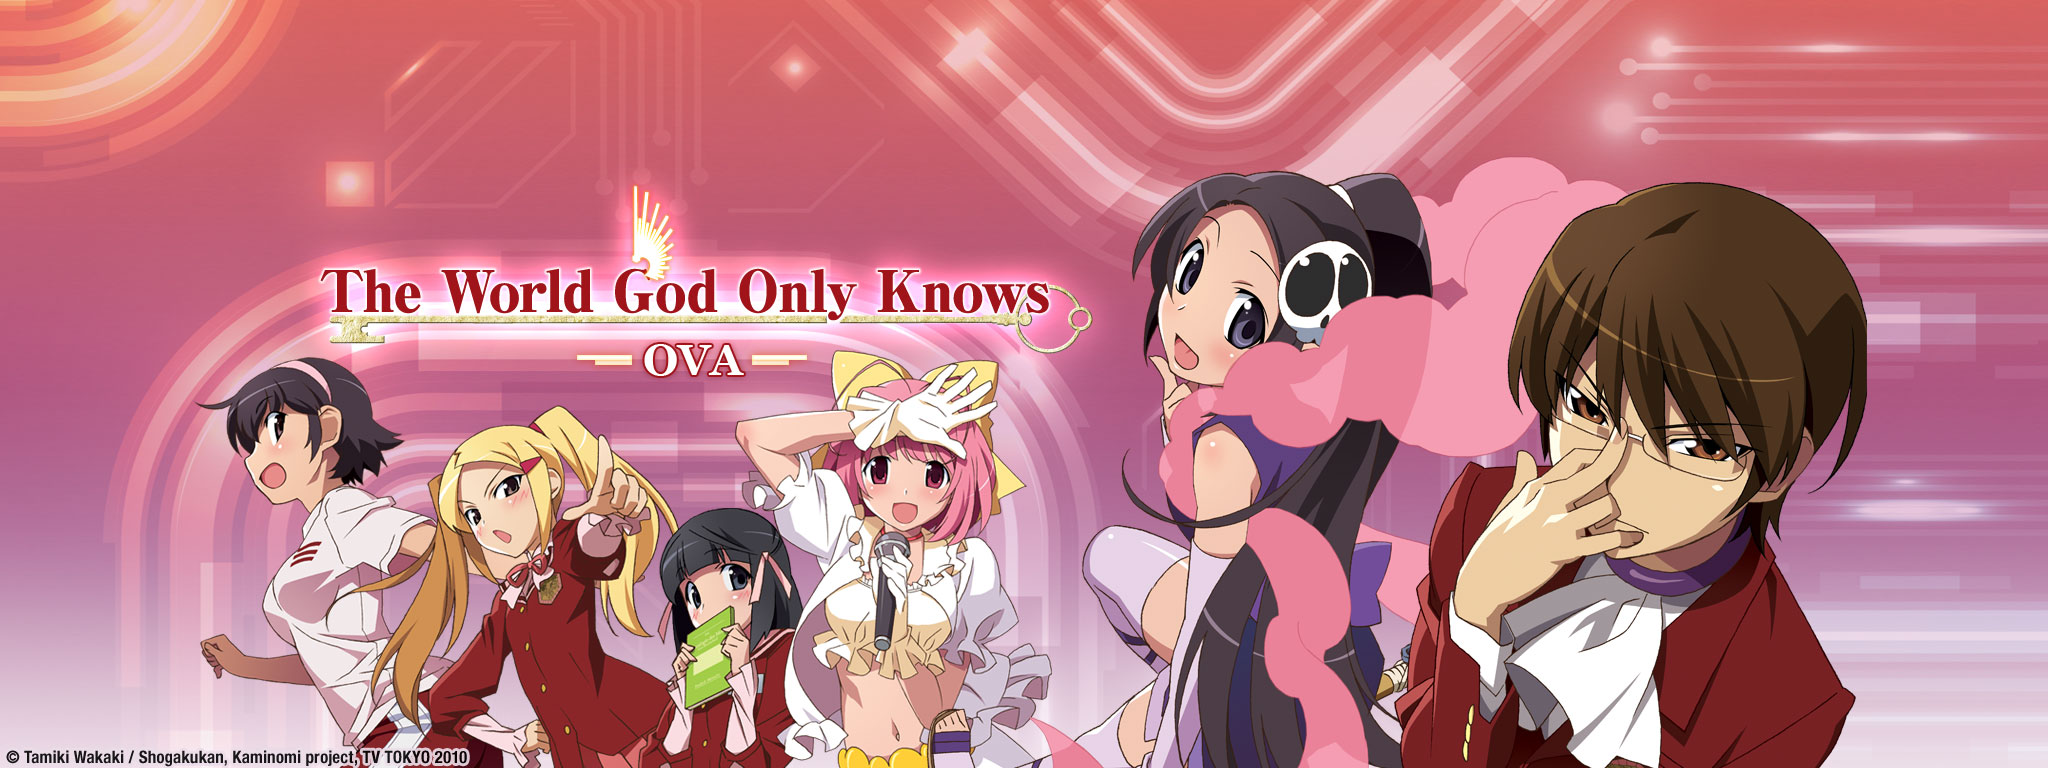 Title Art for The World God Only Knows Season 1 OVA